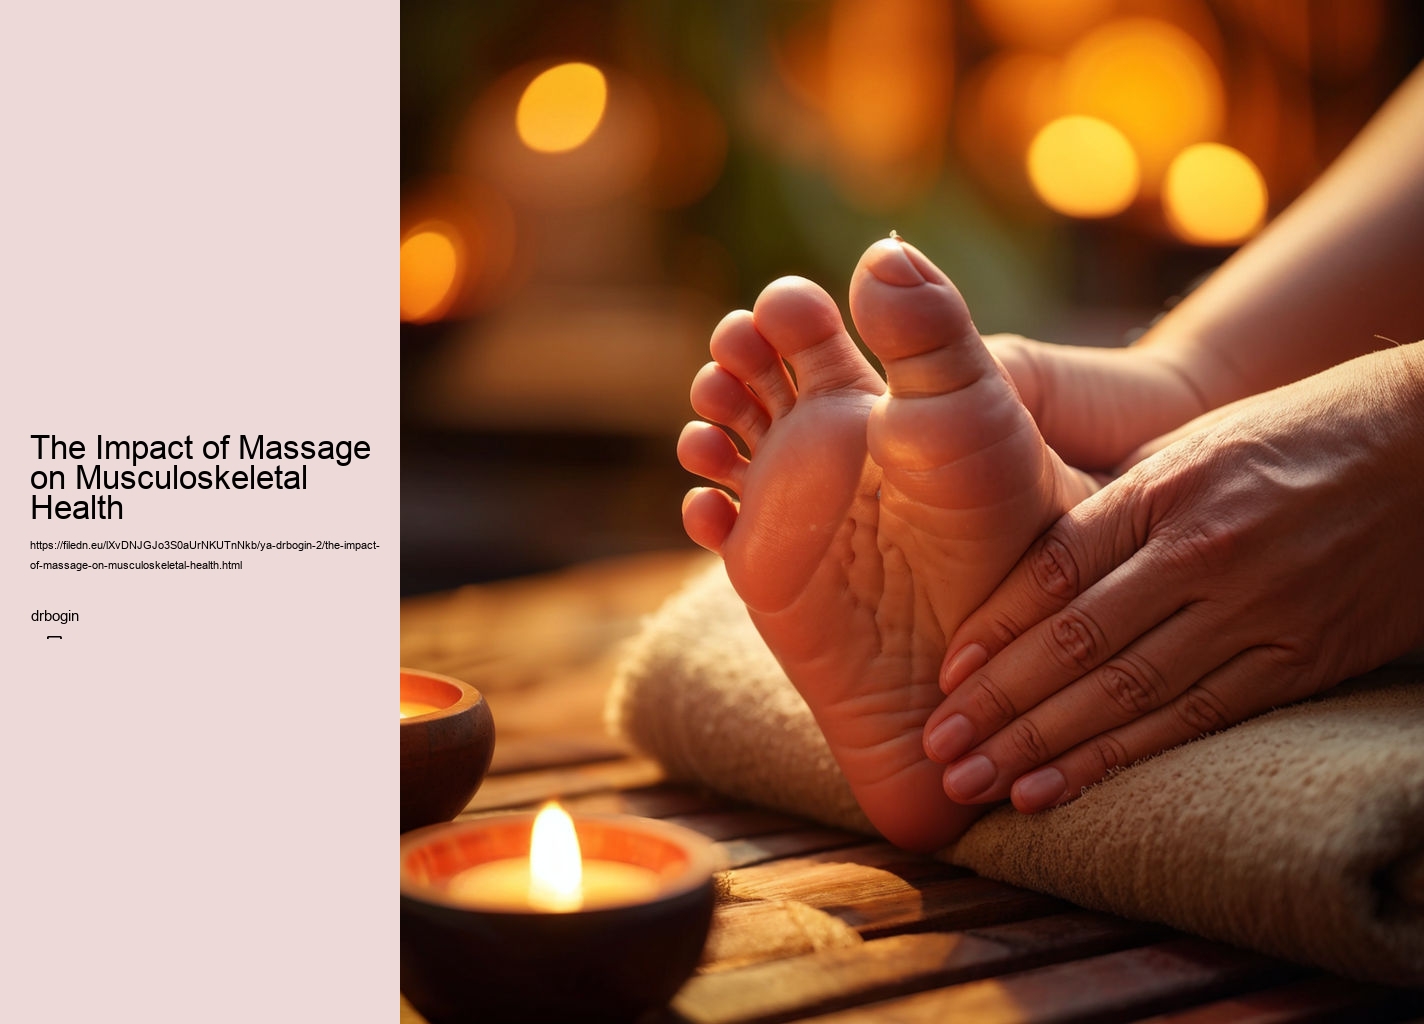 The Impact of Massage on Musculoskeletal Health